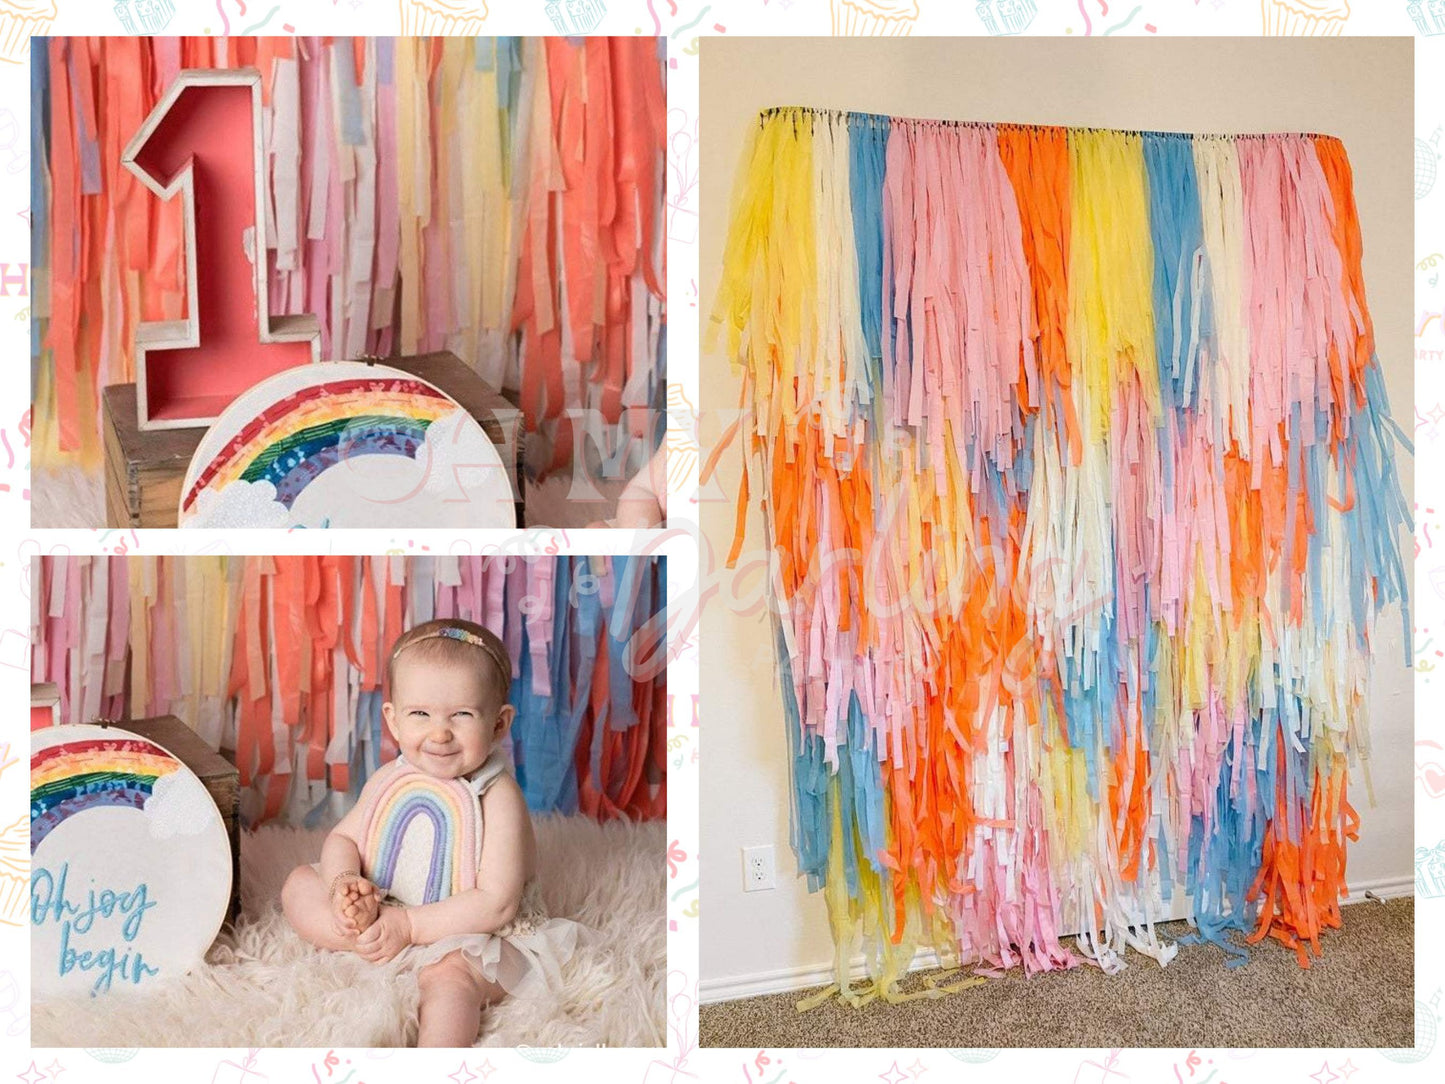 Little Rainbow Fringe Backdrop-Fringe Backdrop-Party Decor-Oh My Darling Party Co-Oh My Darling Party Co-baby, baby shower, backdrops for party, balloon garlands, be my valentine, BLUE BACKDROP, BLUE BACKDROPS, boho rainbow, bright rainbow, bubblegum, buttercup, butterfly, coral, cream, default, fairy, fringe garland, Fringe Streamers, girl baby shower, girl party, light blue, oh baby, OMDPC, ORANGE BACKDROP, party backdrops, pastel, pastel birthday, pastel party, pastel rainbows, pastel unicorn party, past